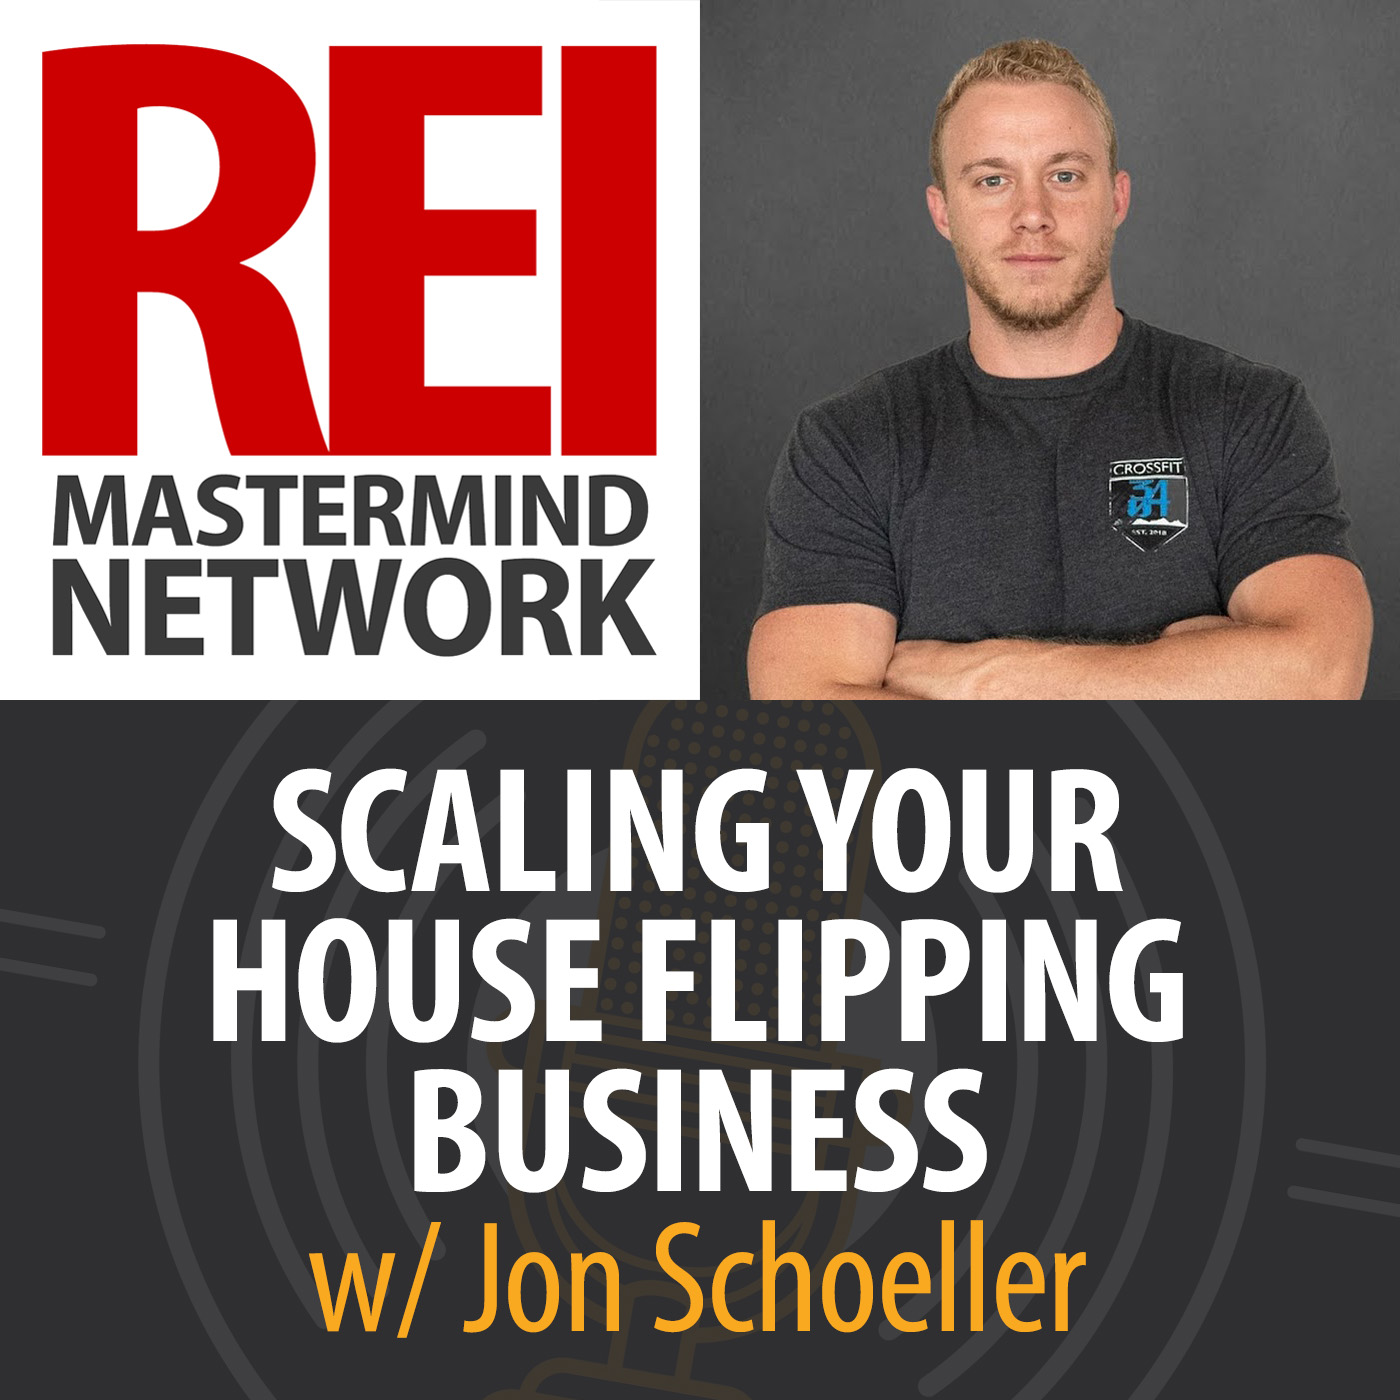 Scaling Your House Flipping Business with Jon Schoeller Image